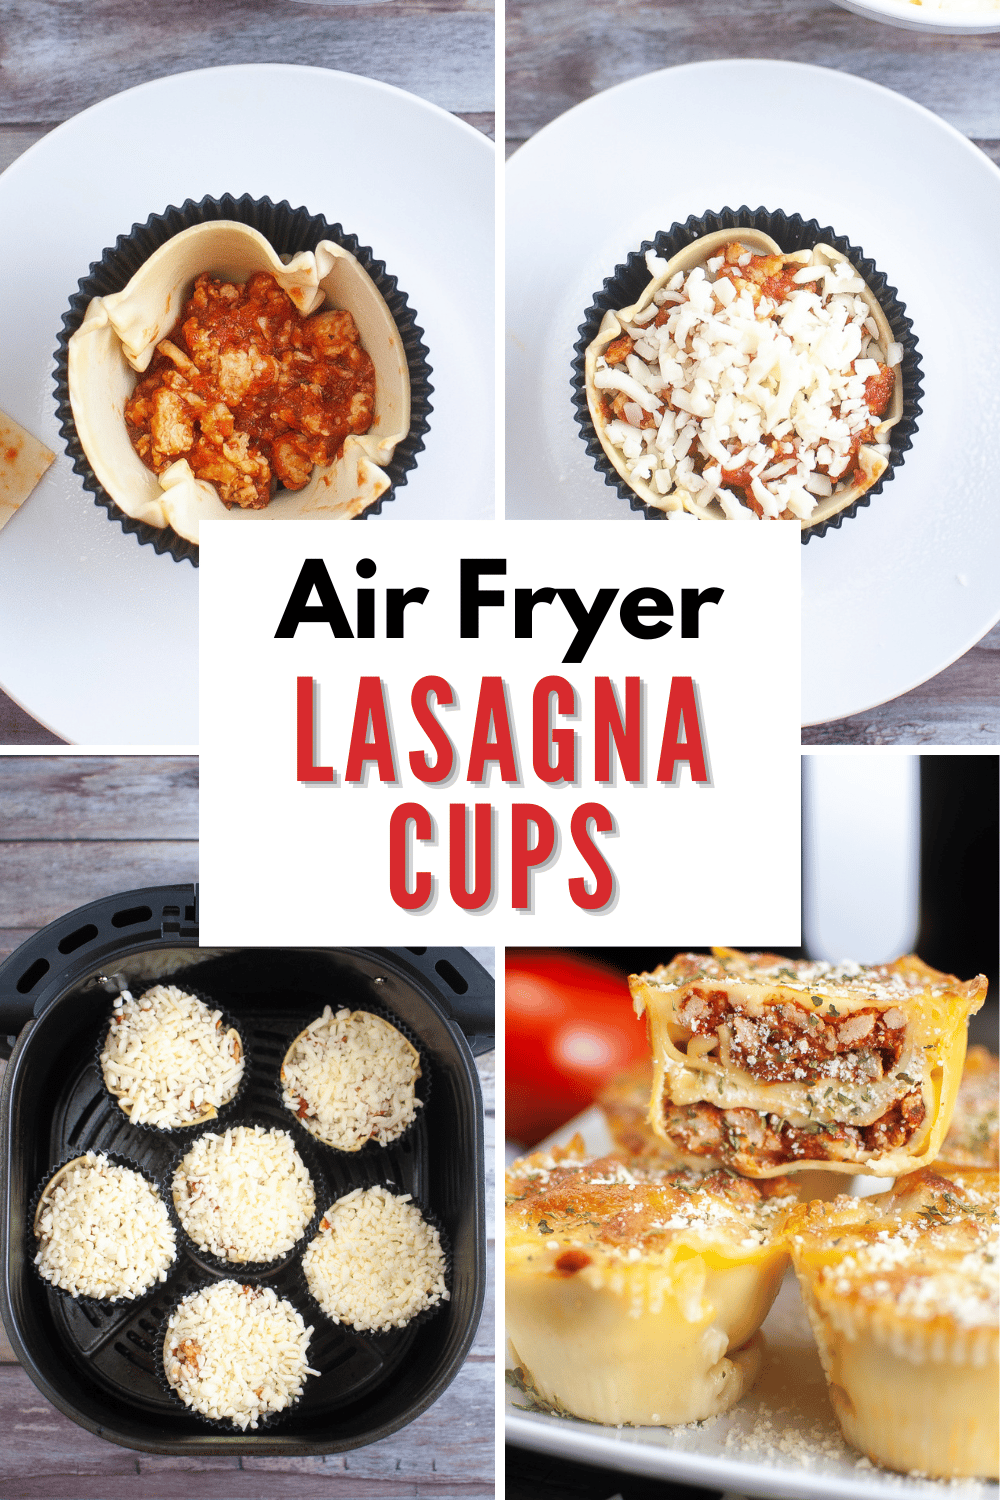 Air Fryer Lasagna Cups are the perfect portioned size for a quick and easy weeknight meal. They are cheesy, saucy, and full of flavor! #airfryerlasagna #airfryer #lasagna #dinner #recipe via @wondermomwannab